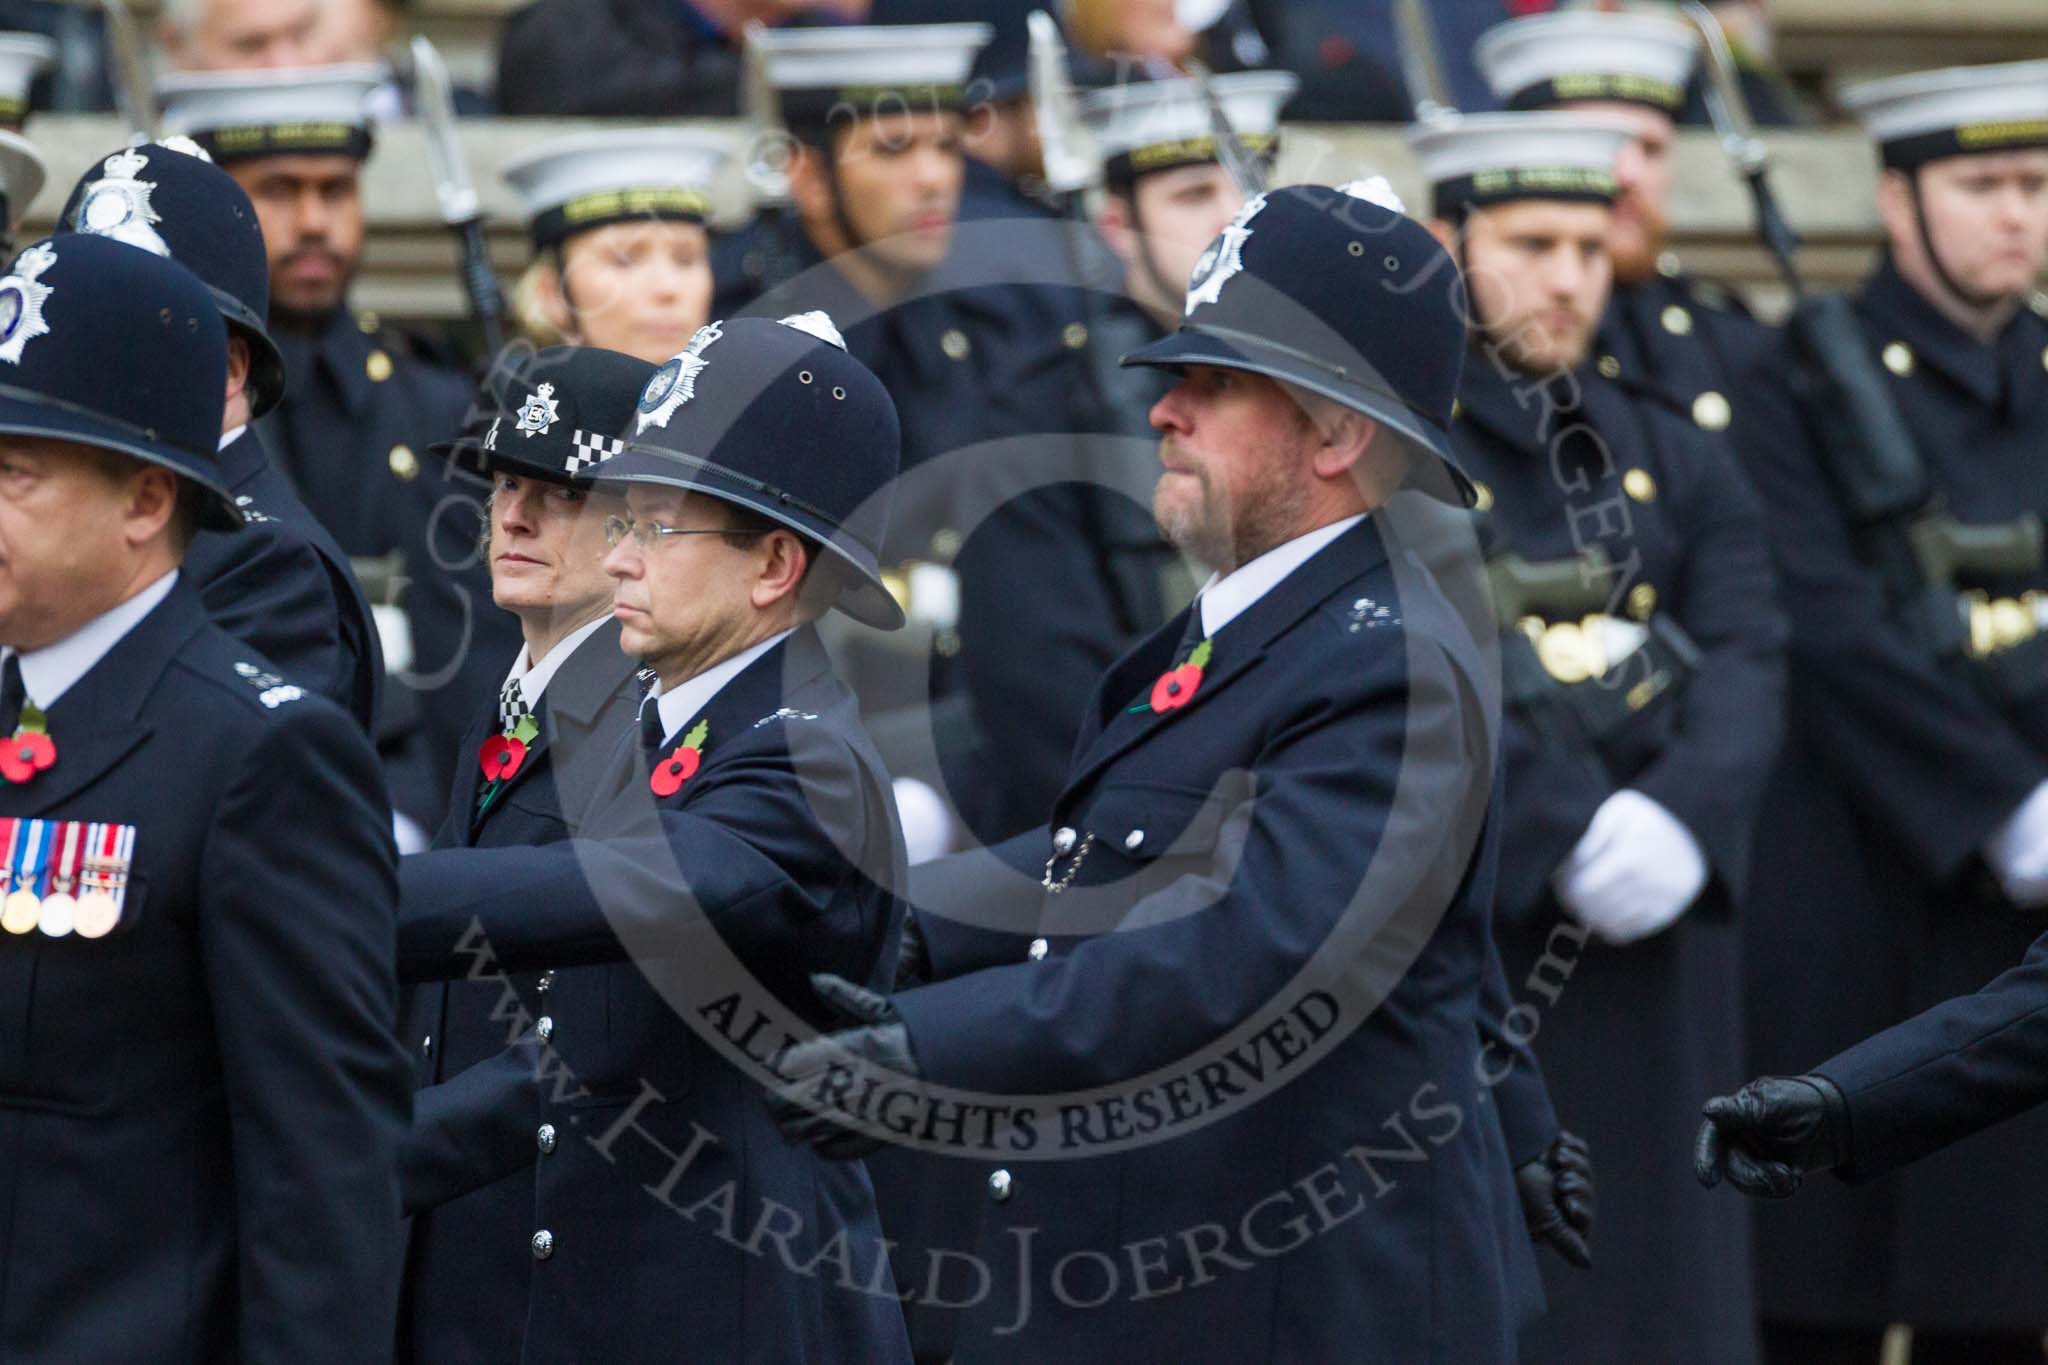 Remembrance Sunday at the Cenotaph 2015: Group M12, Metropolitan Special Constabulary.
Cenotaph, Whitehall, London SW1,
London,
Greater London,
United Kingdom,
on 08 November 2015 at 12:15, image #1483